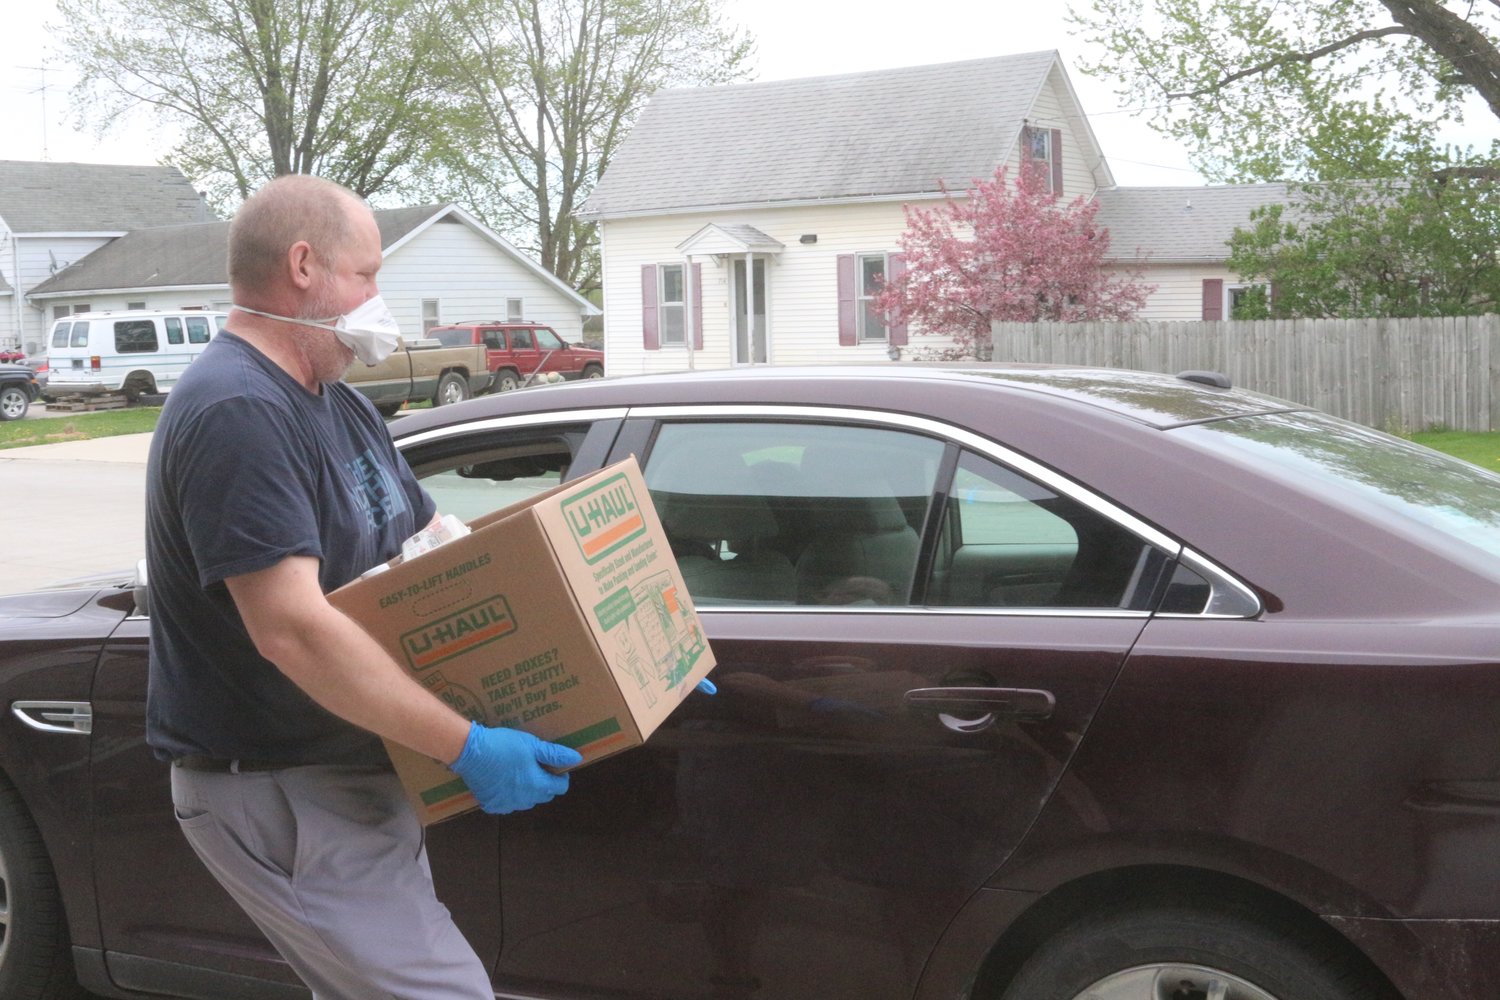 Kalona City Administrator Ryan Schlabaugh carries a box of food to a car.